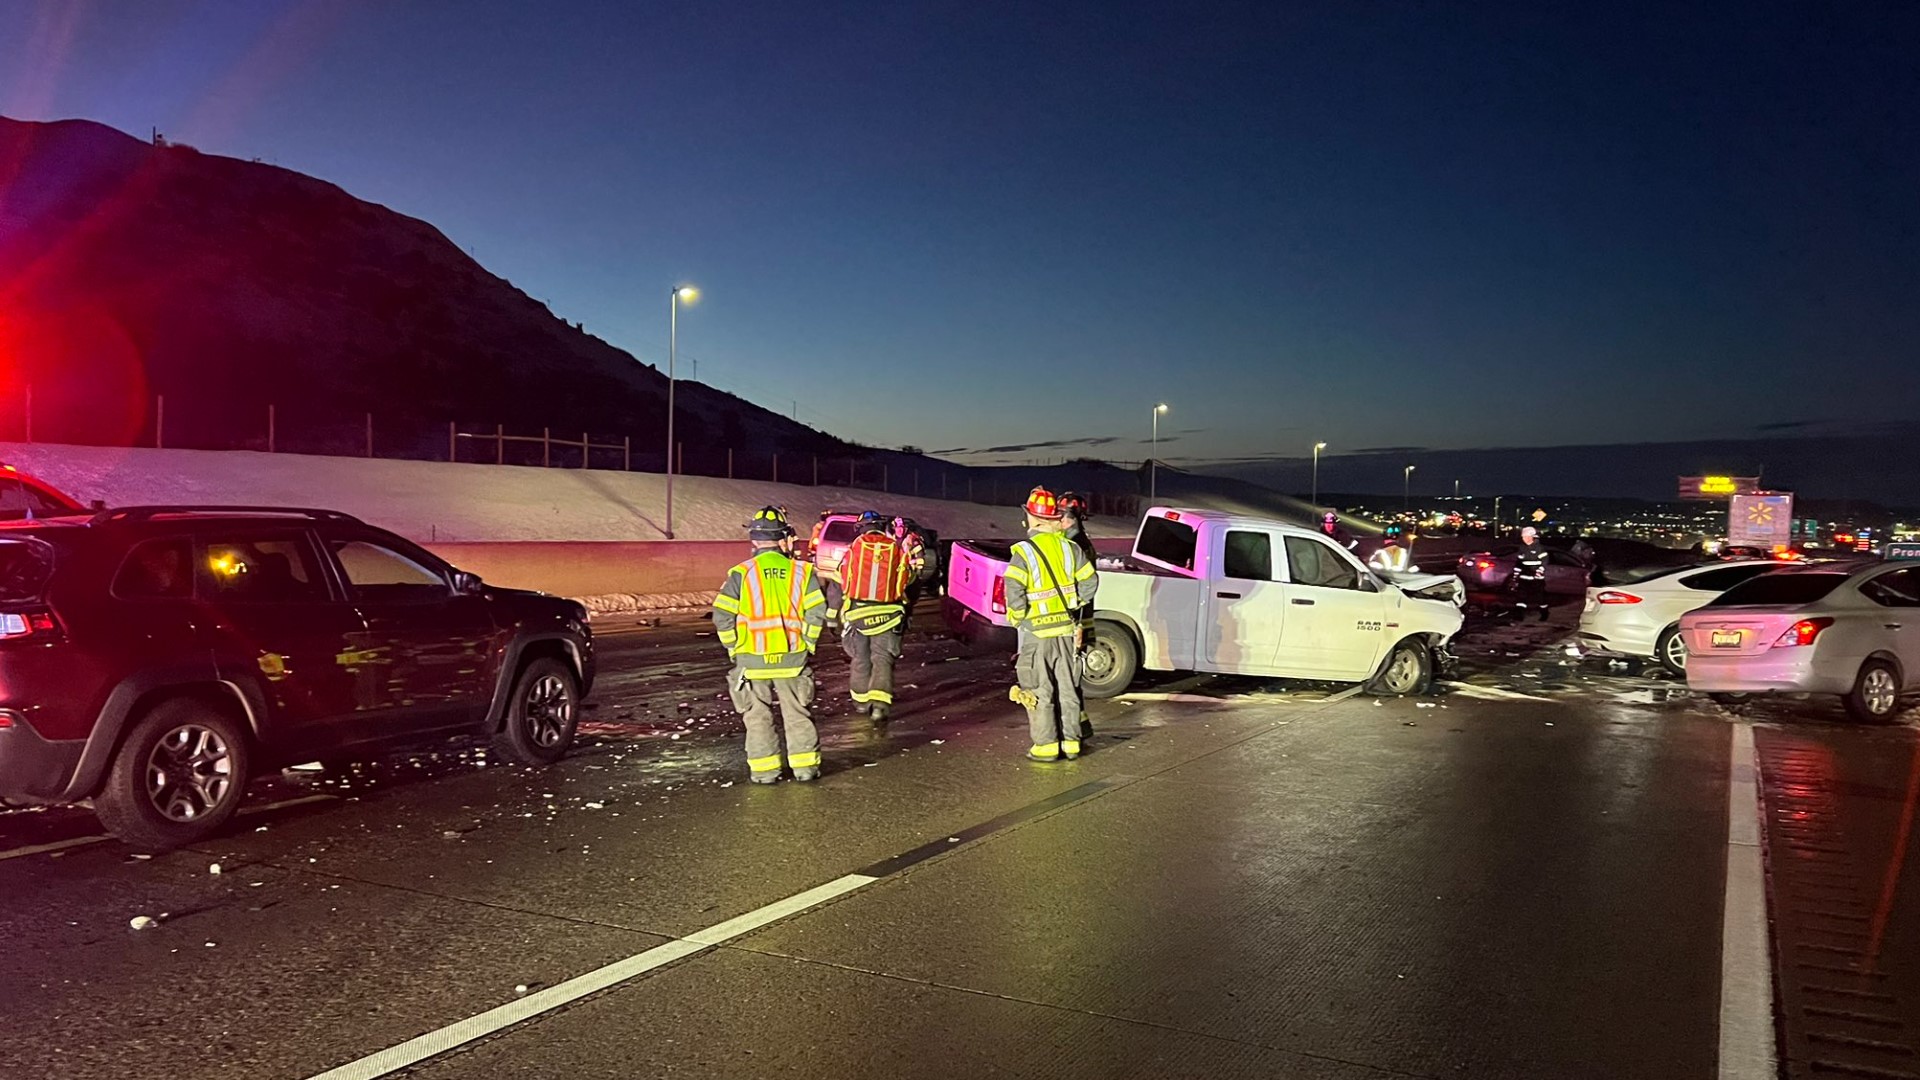 Colorado State Patrol said icy conditions are believed to be a factor.